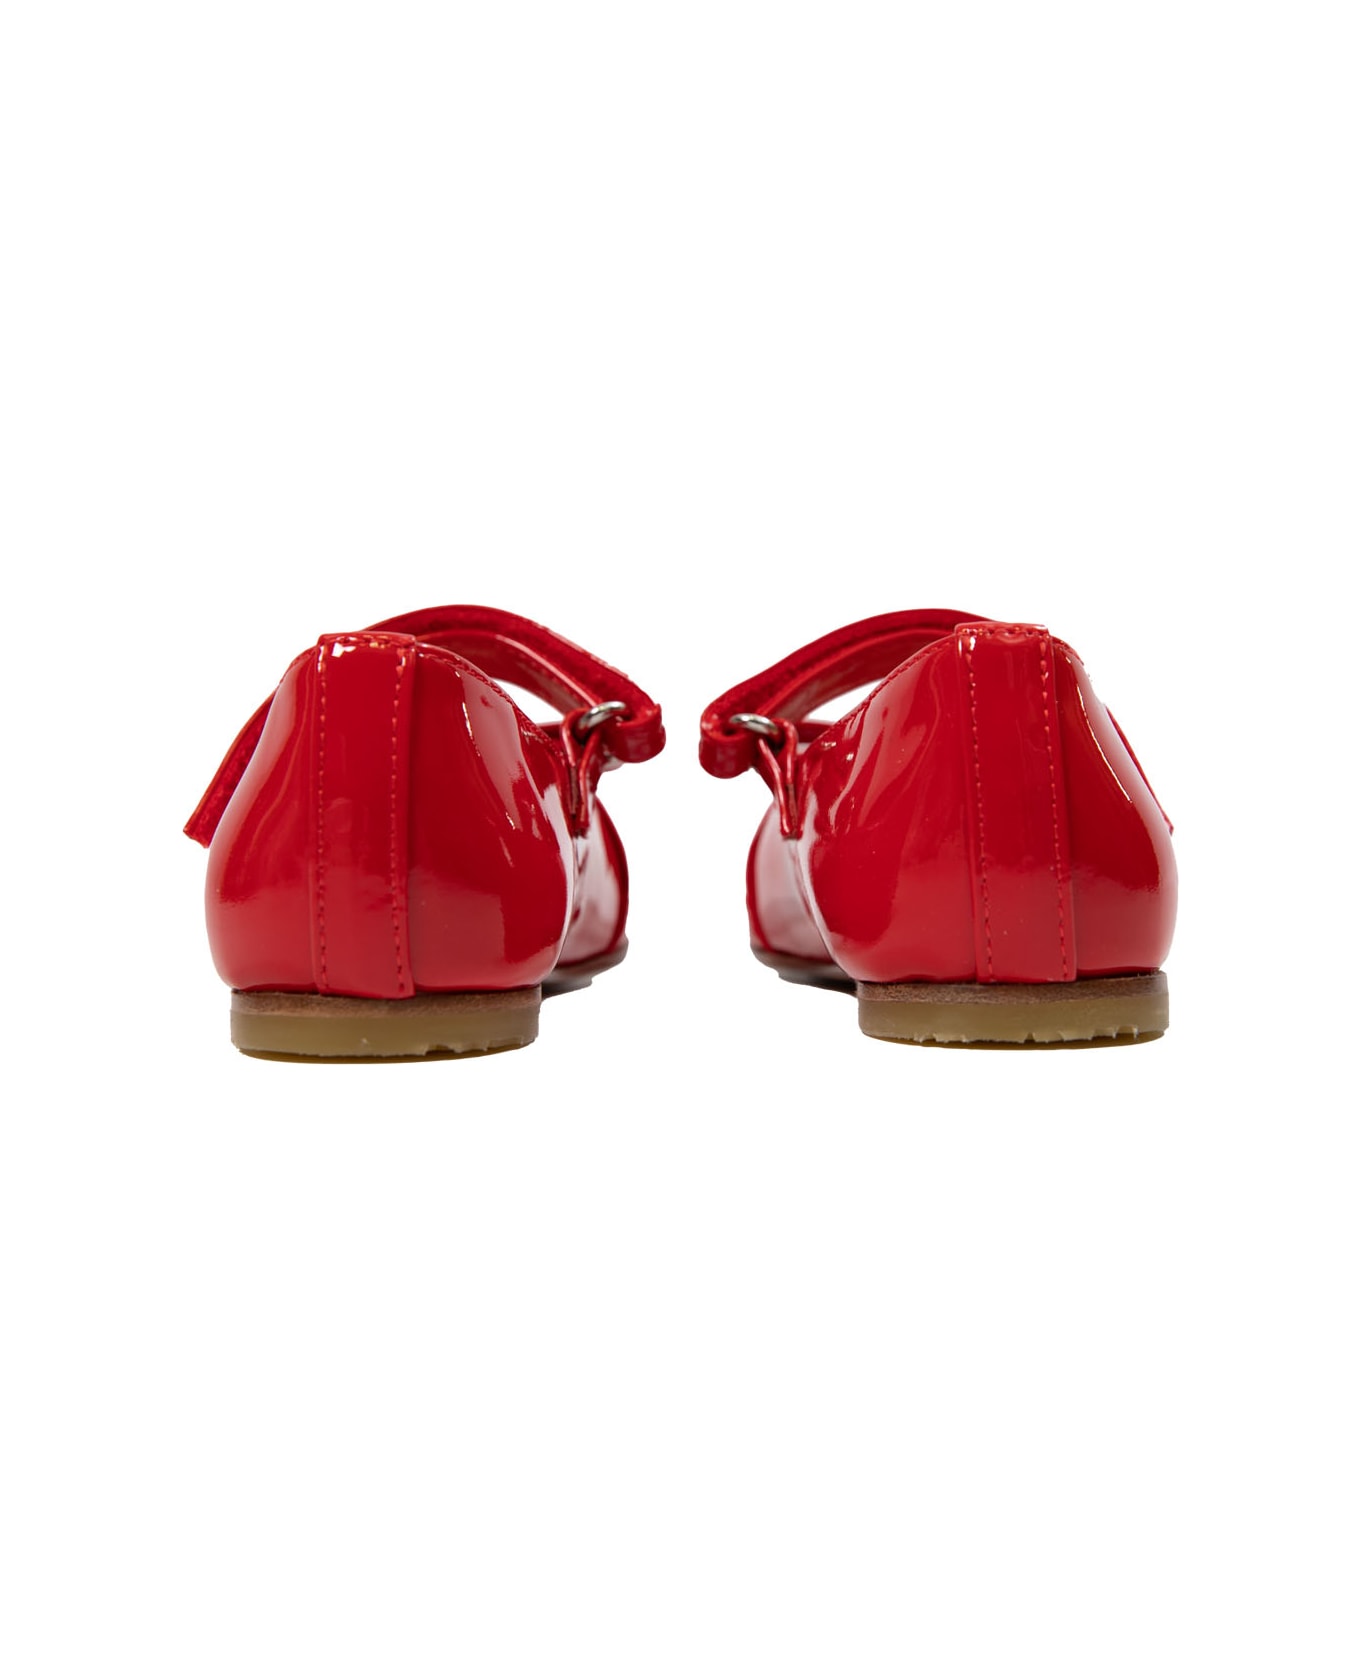 Andrea Montelpare Patent Leather Shoes - Red シューズ